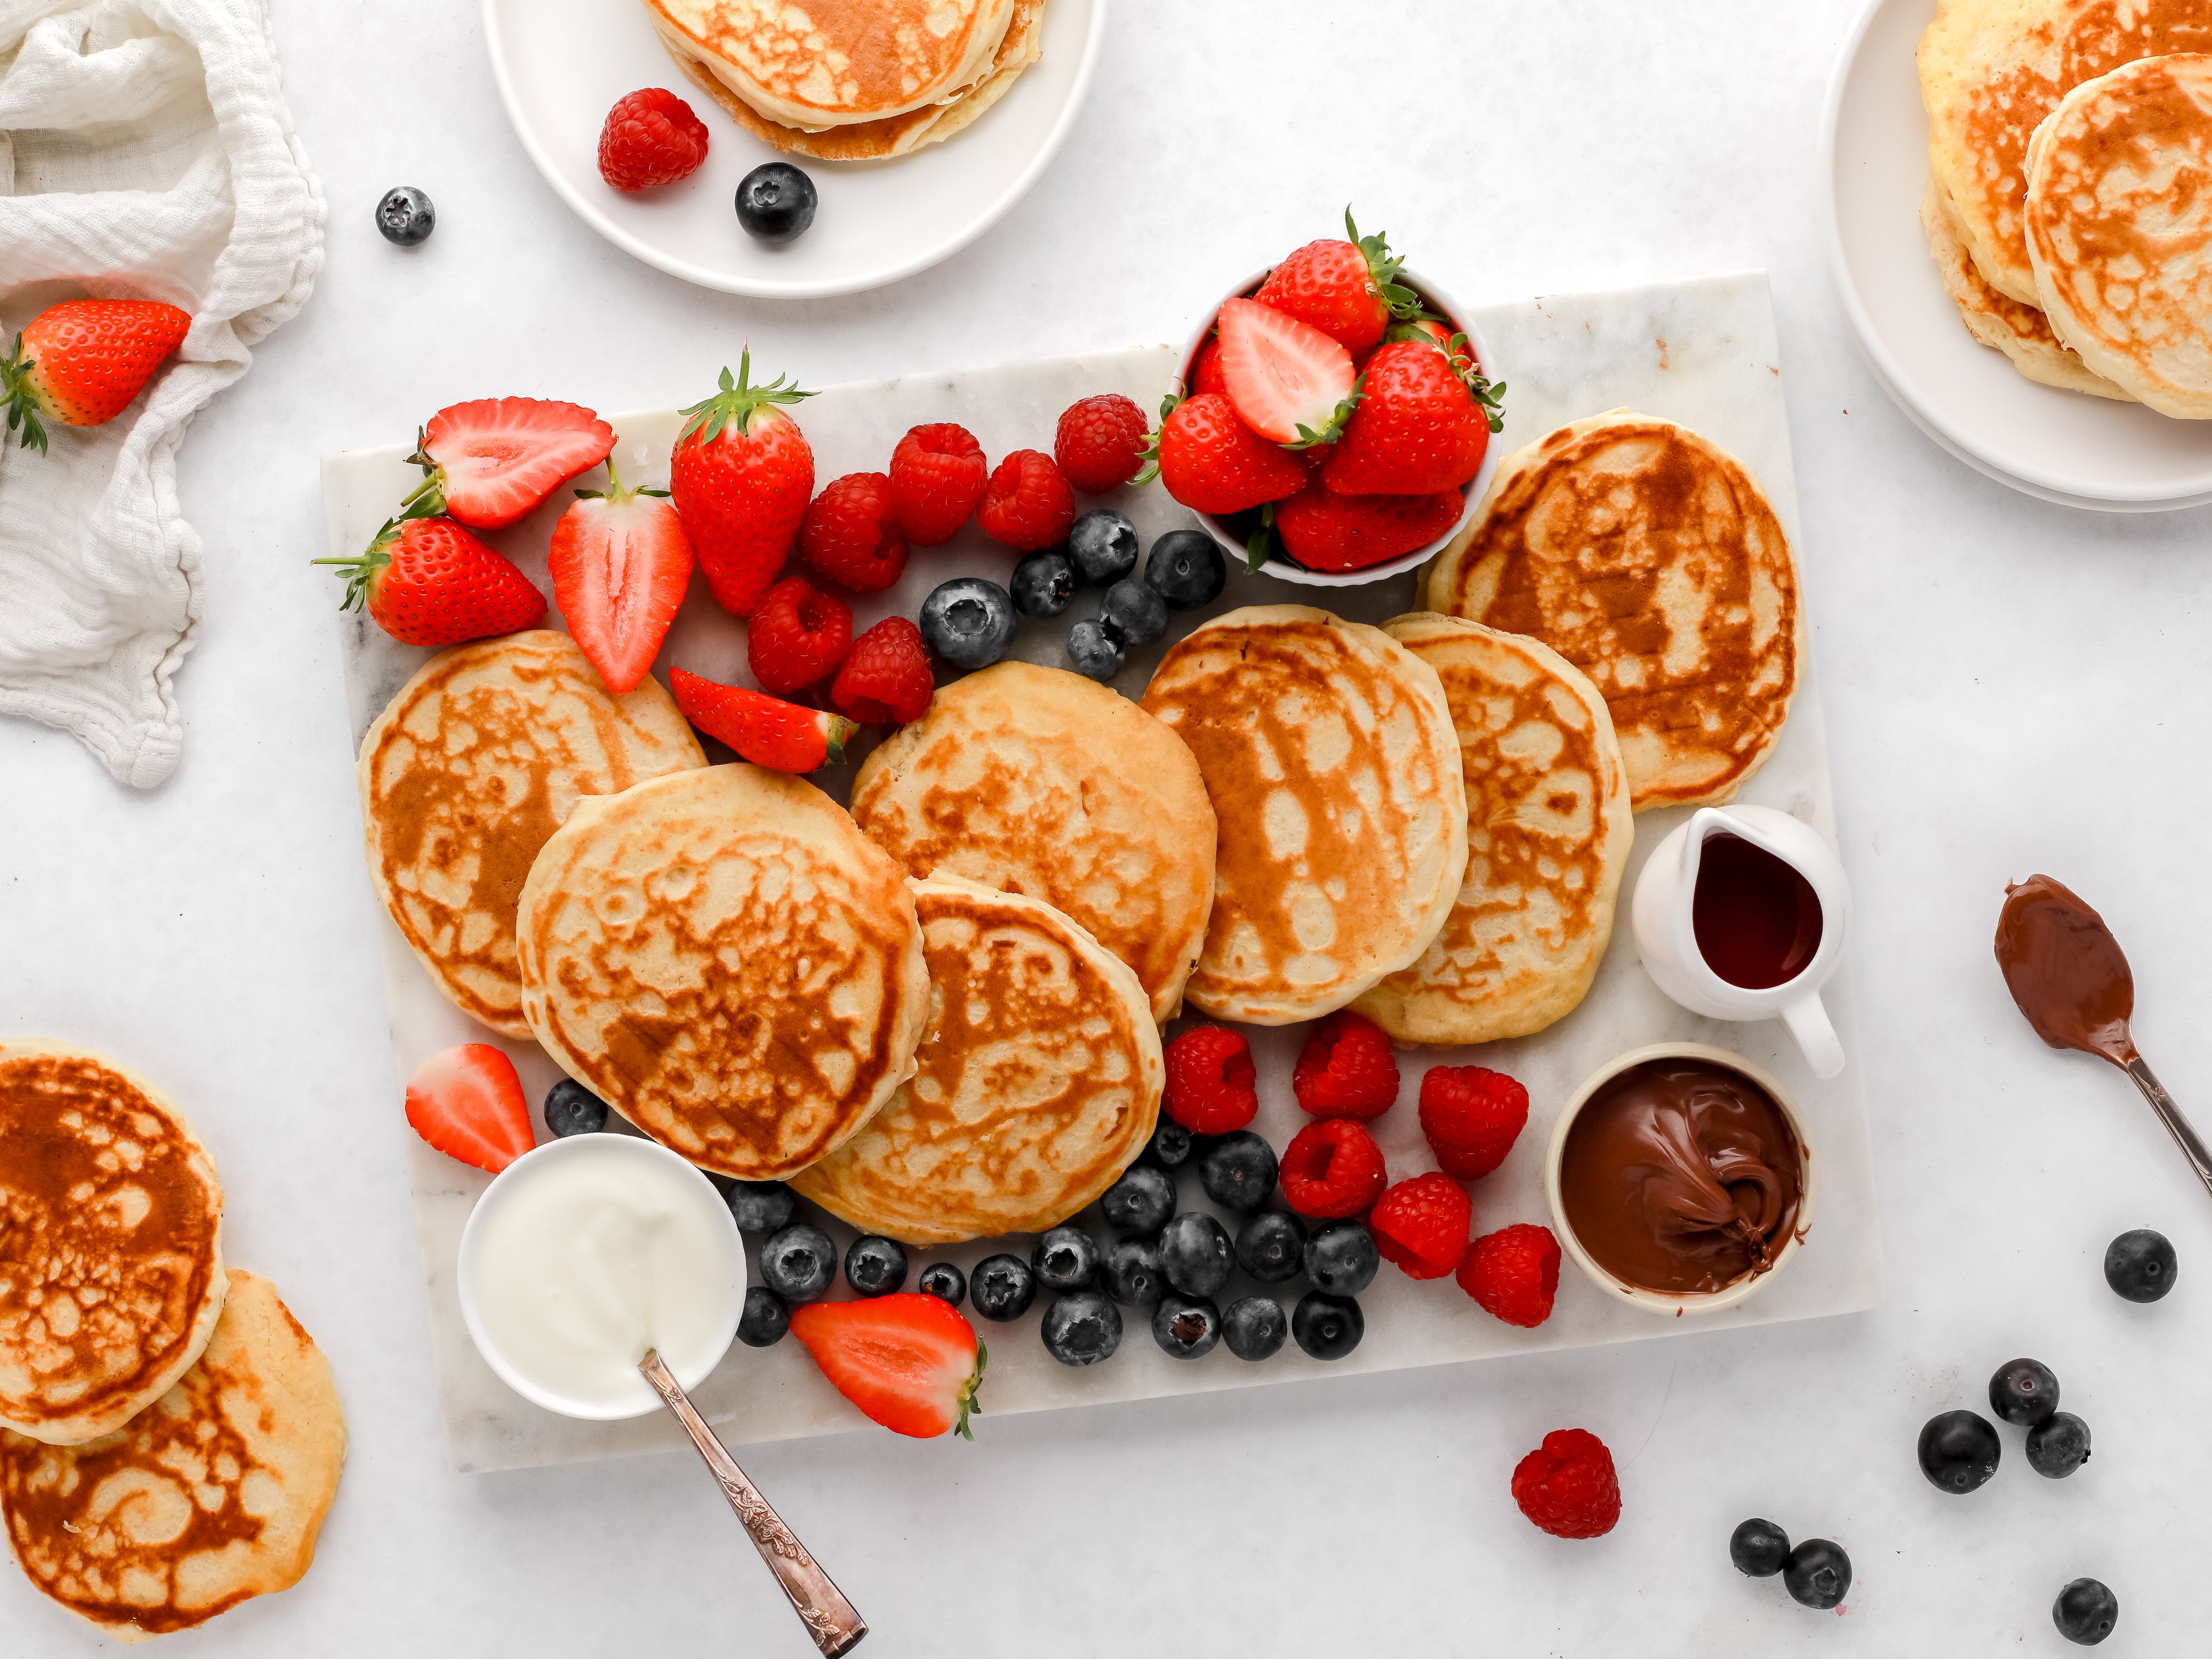 Pancake platter with fresh fruit and dipping bowls